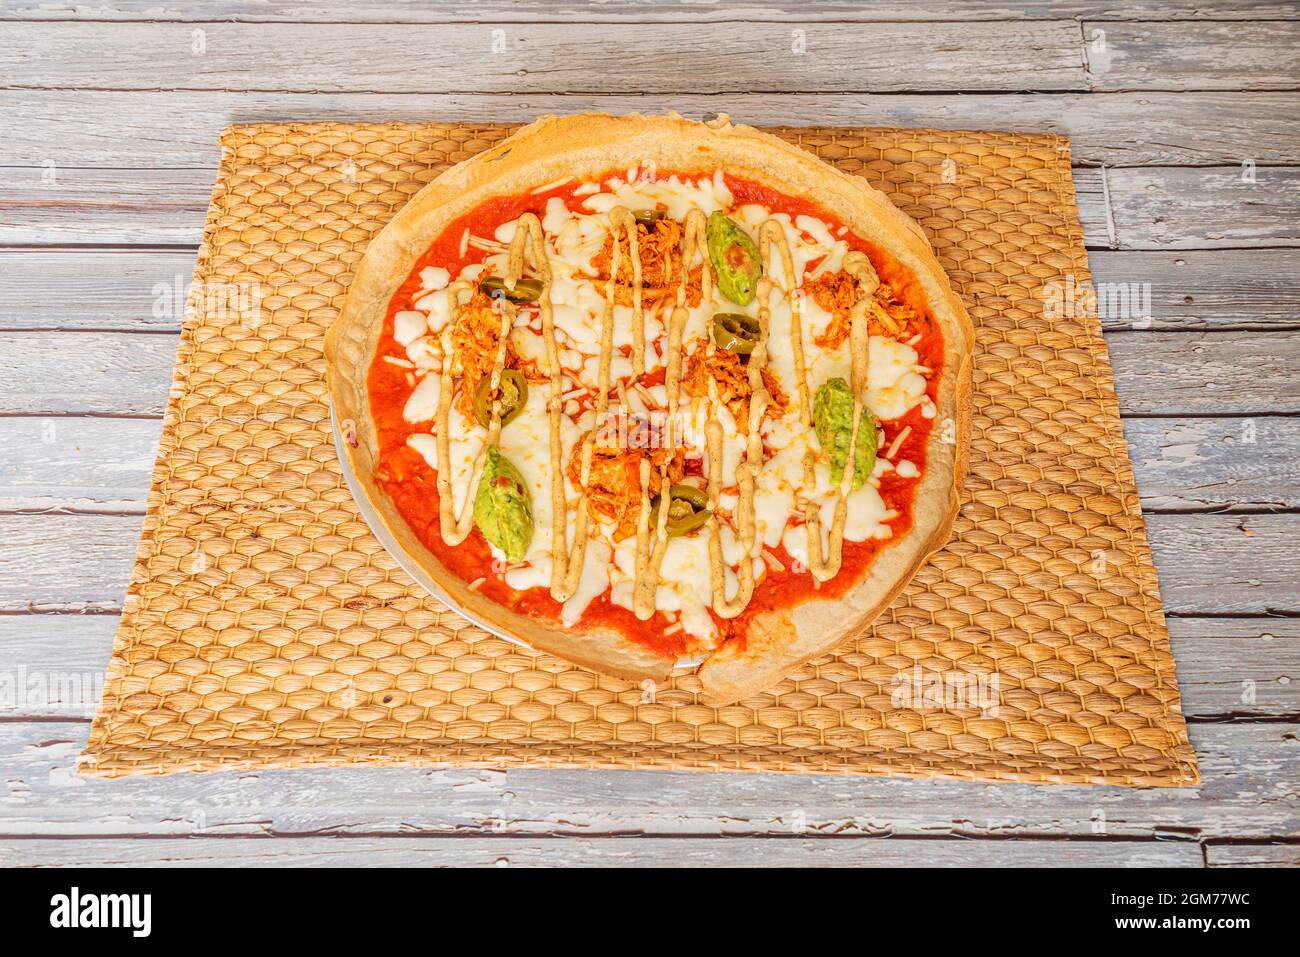 Tex mex pizza recipe with guacamole, tinga chicken meat and jalapeños with mozzarella cheese with tomato and with chickpea flour dough Stock Photo